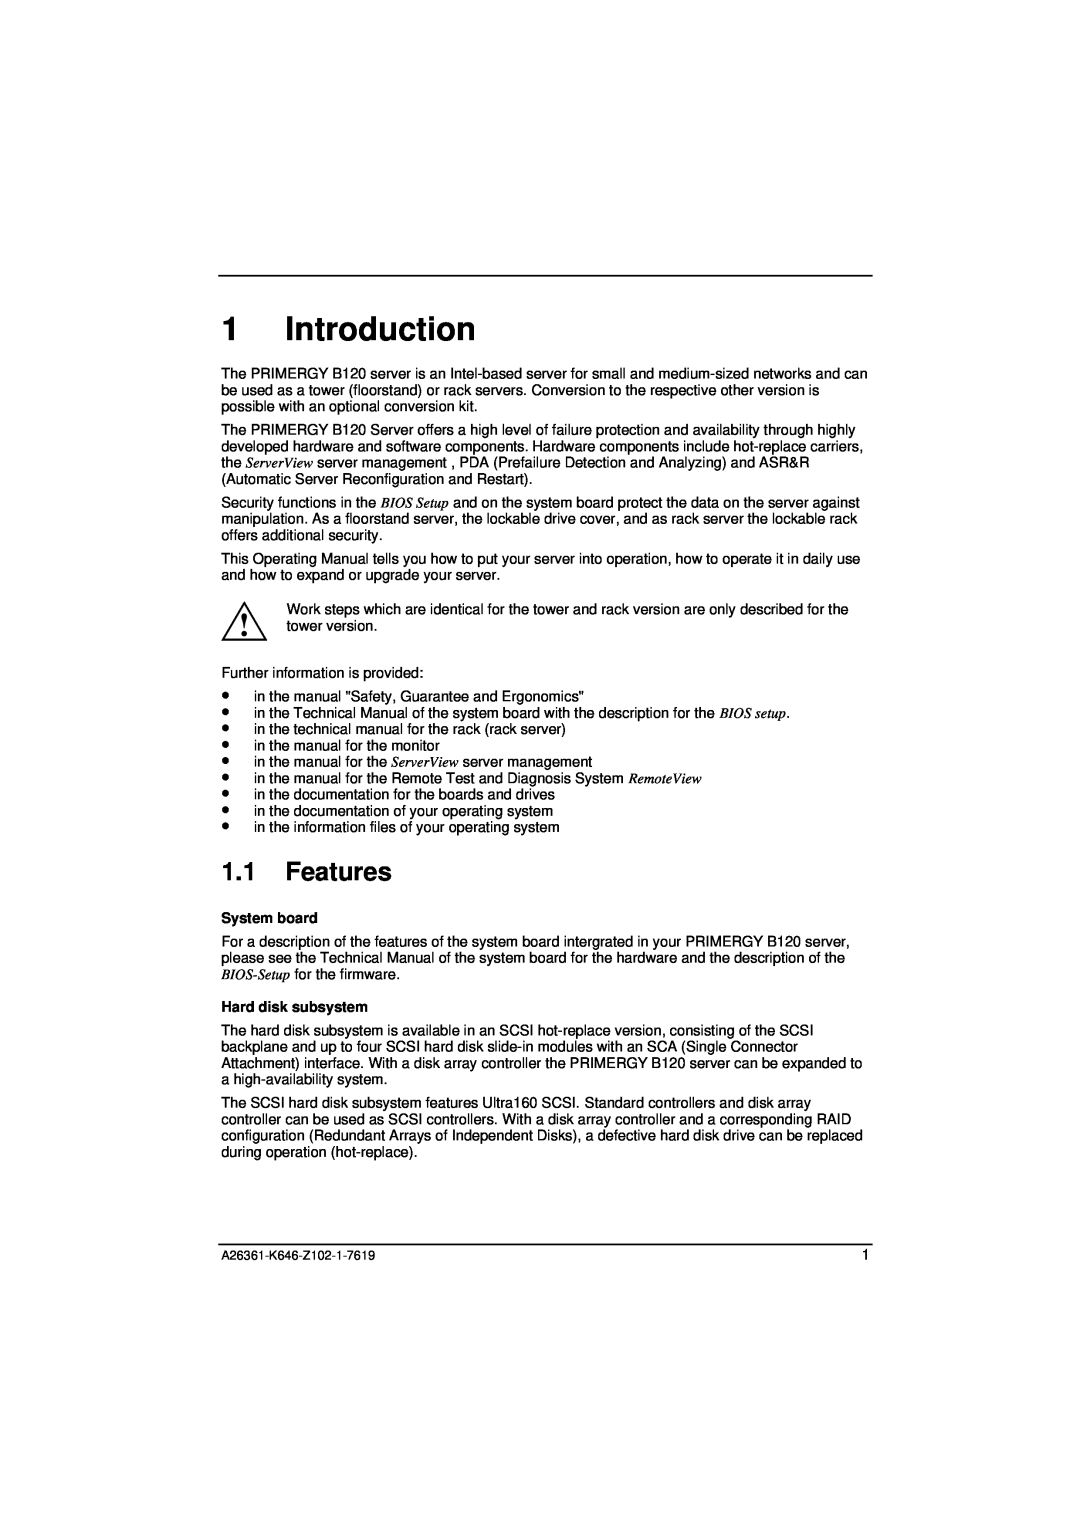 Fujitsu B120 manual Introduction, Features, System board, Hard disk subsystem 